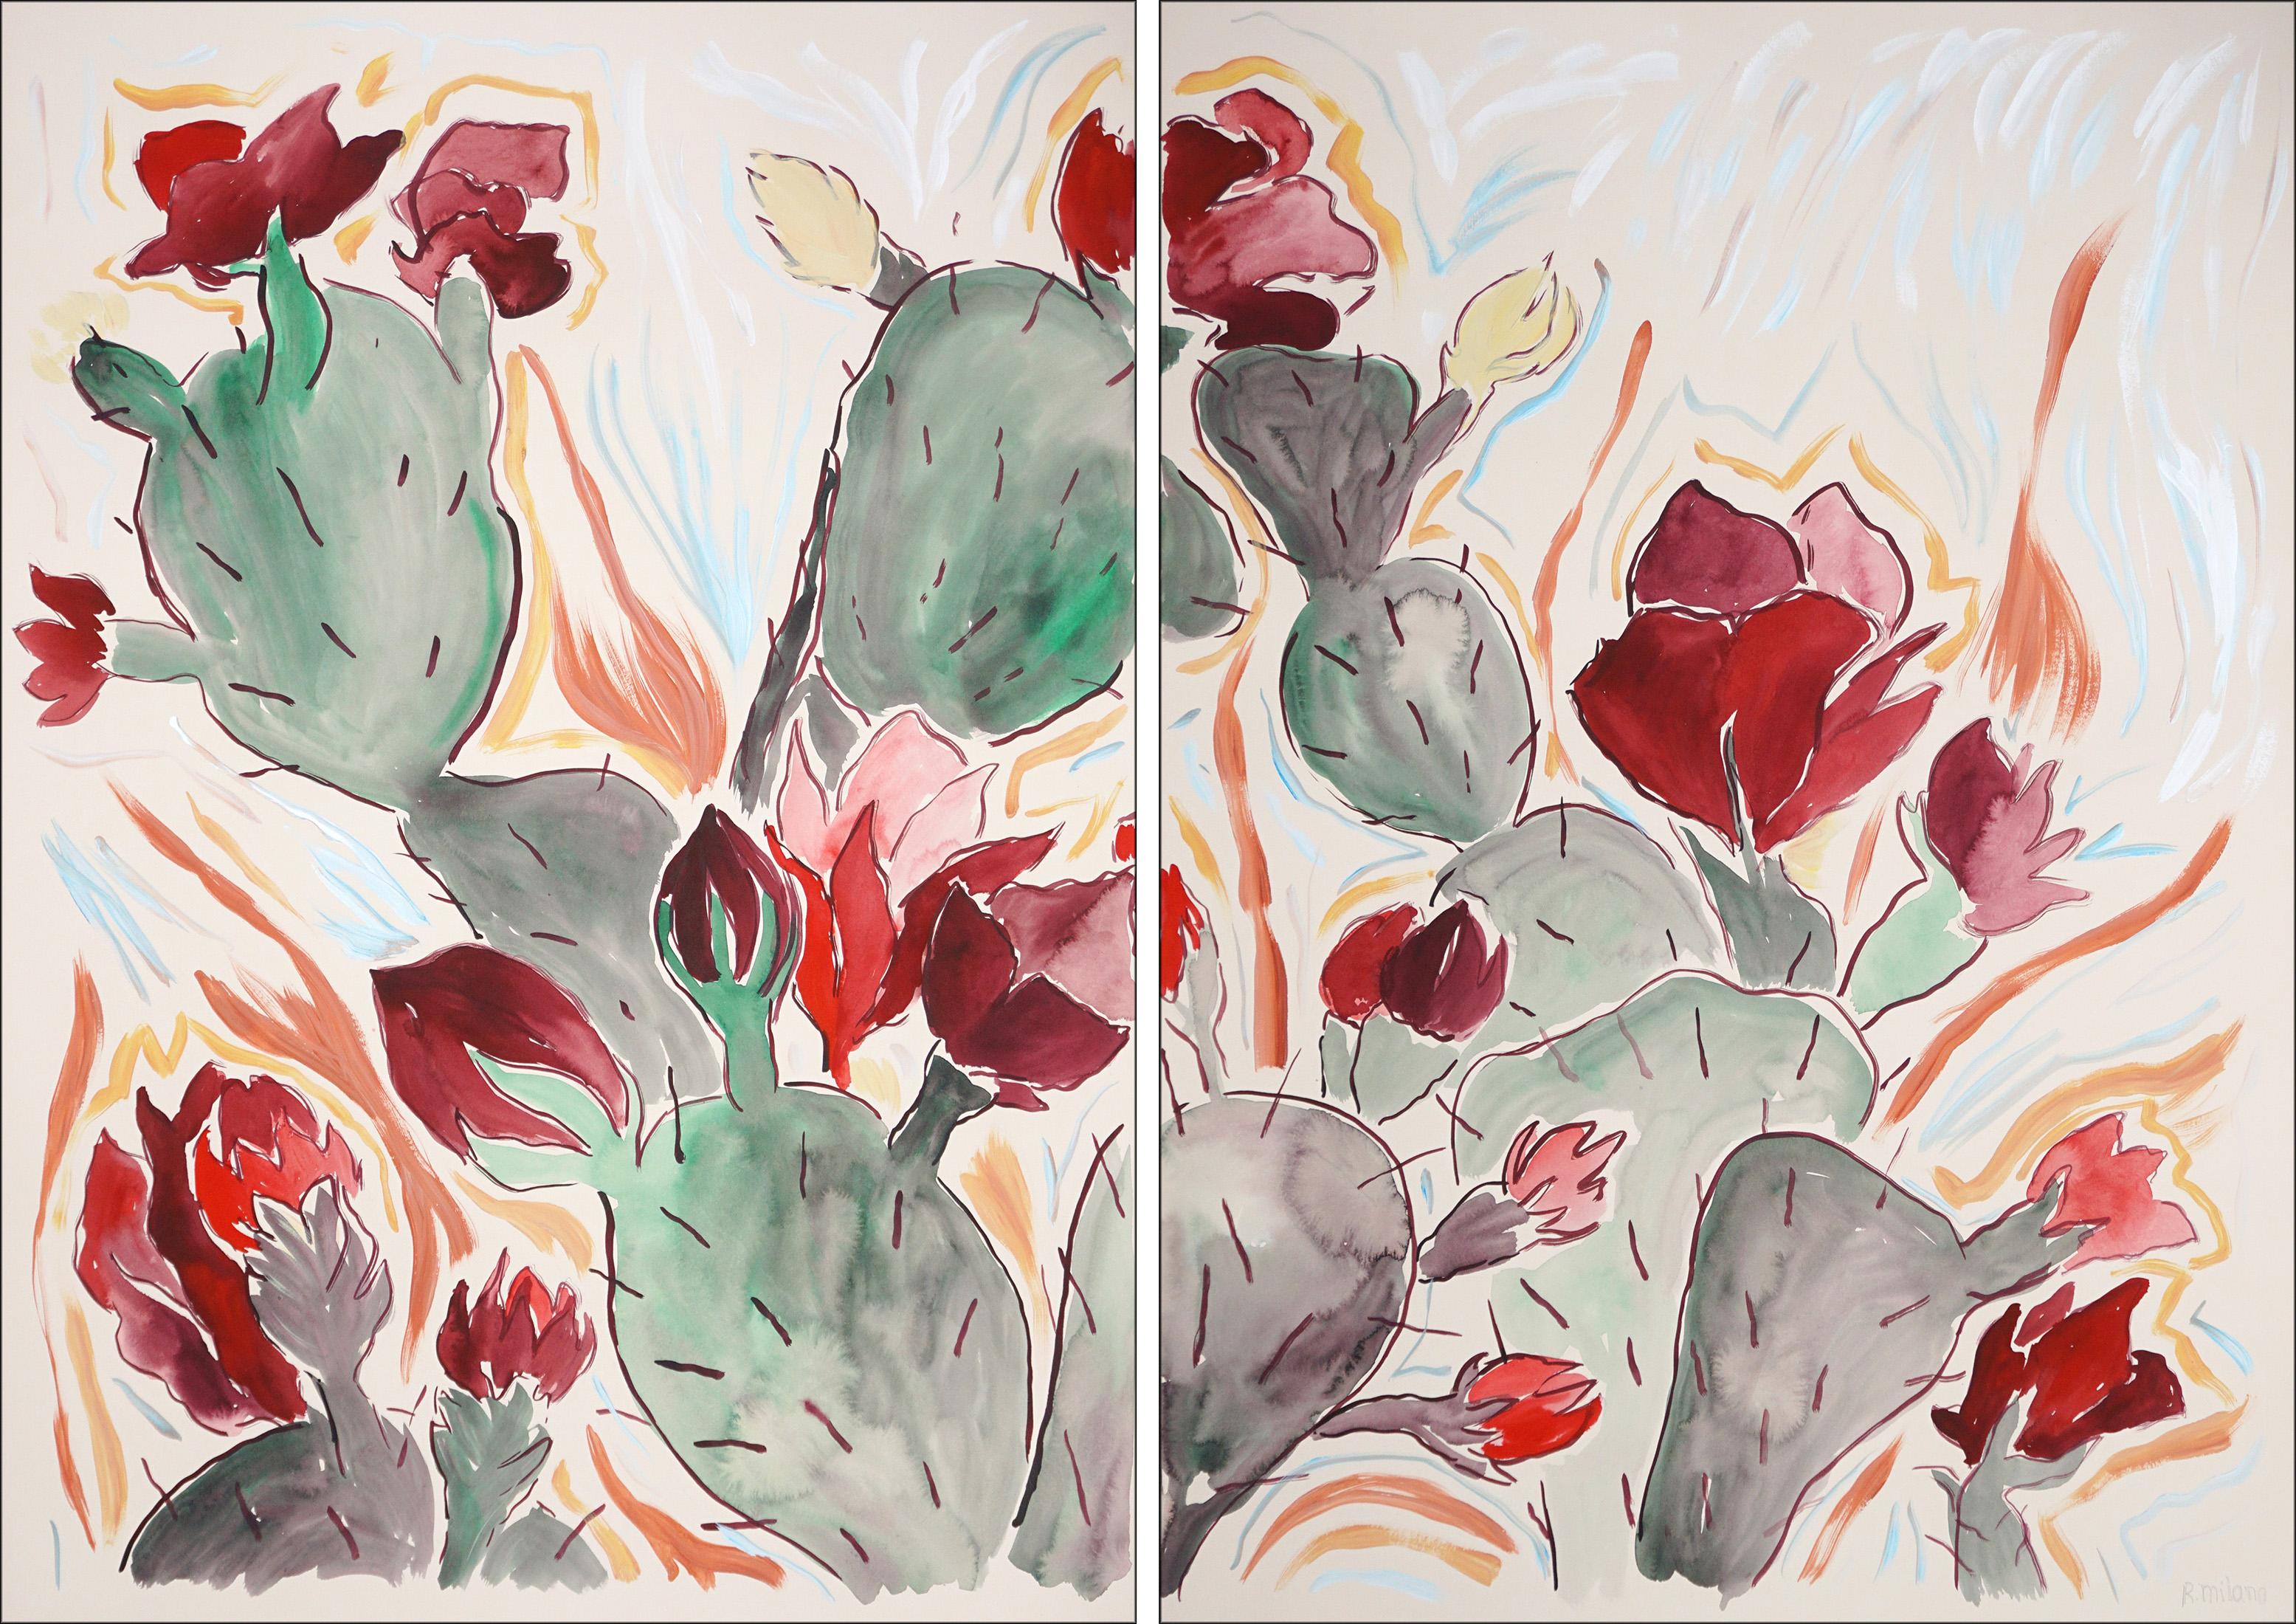 Romina Milano Landscape Painting - Wild Blooming Cactus Illustration Style Diptych, Red Flowers, Desert Landscape